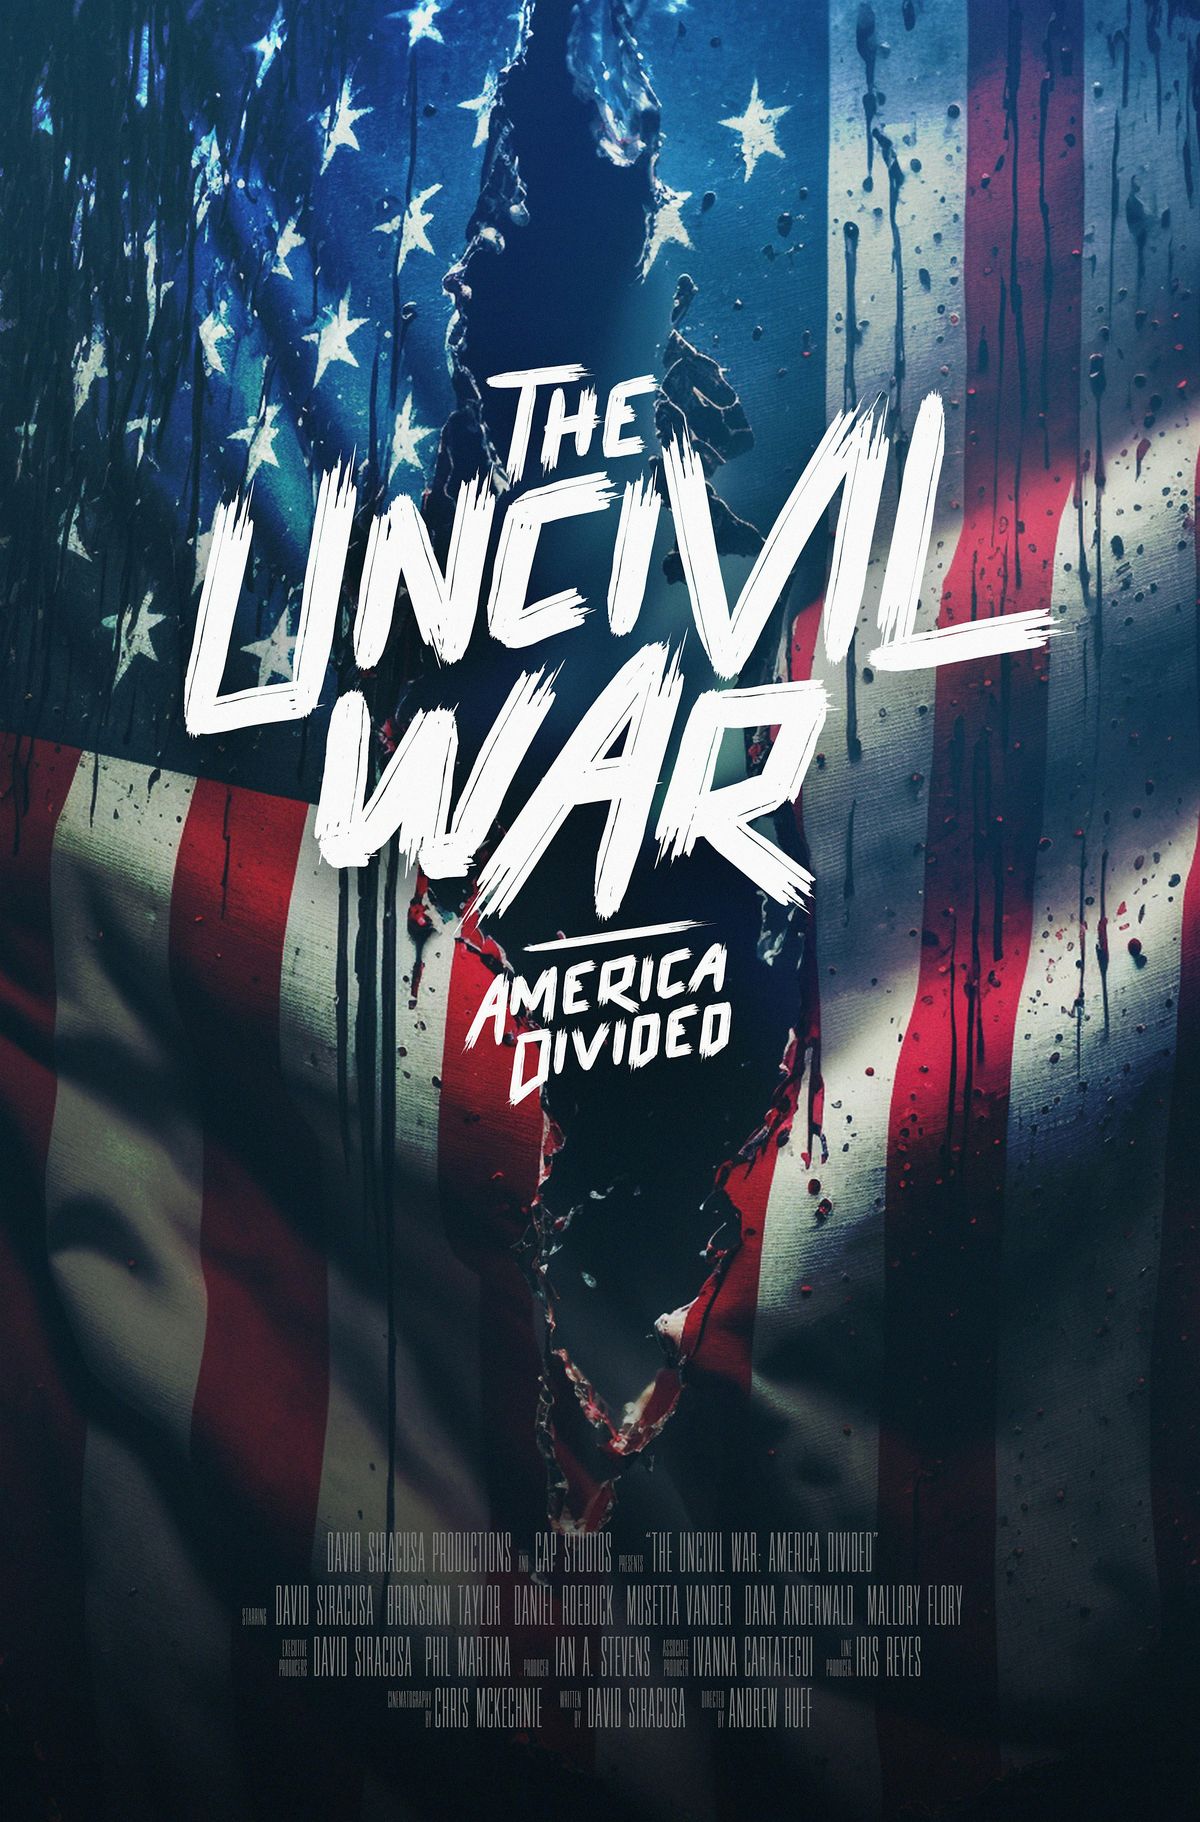 The Uncivil War - America Divided Paragon in Naples